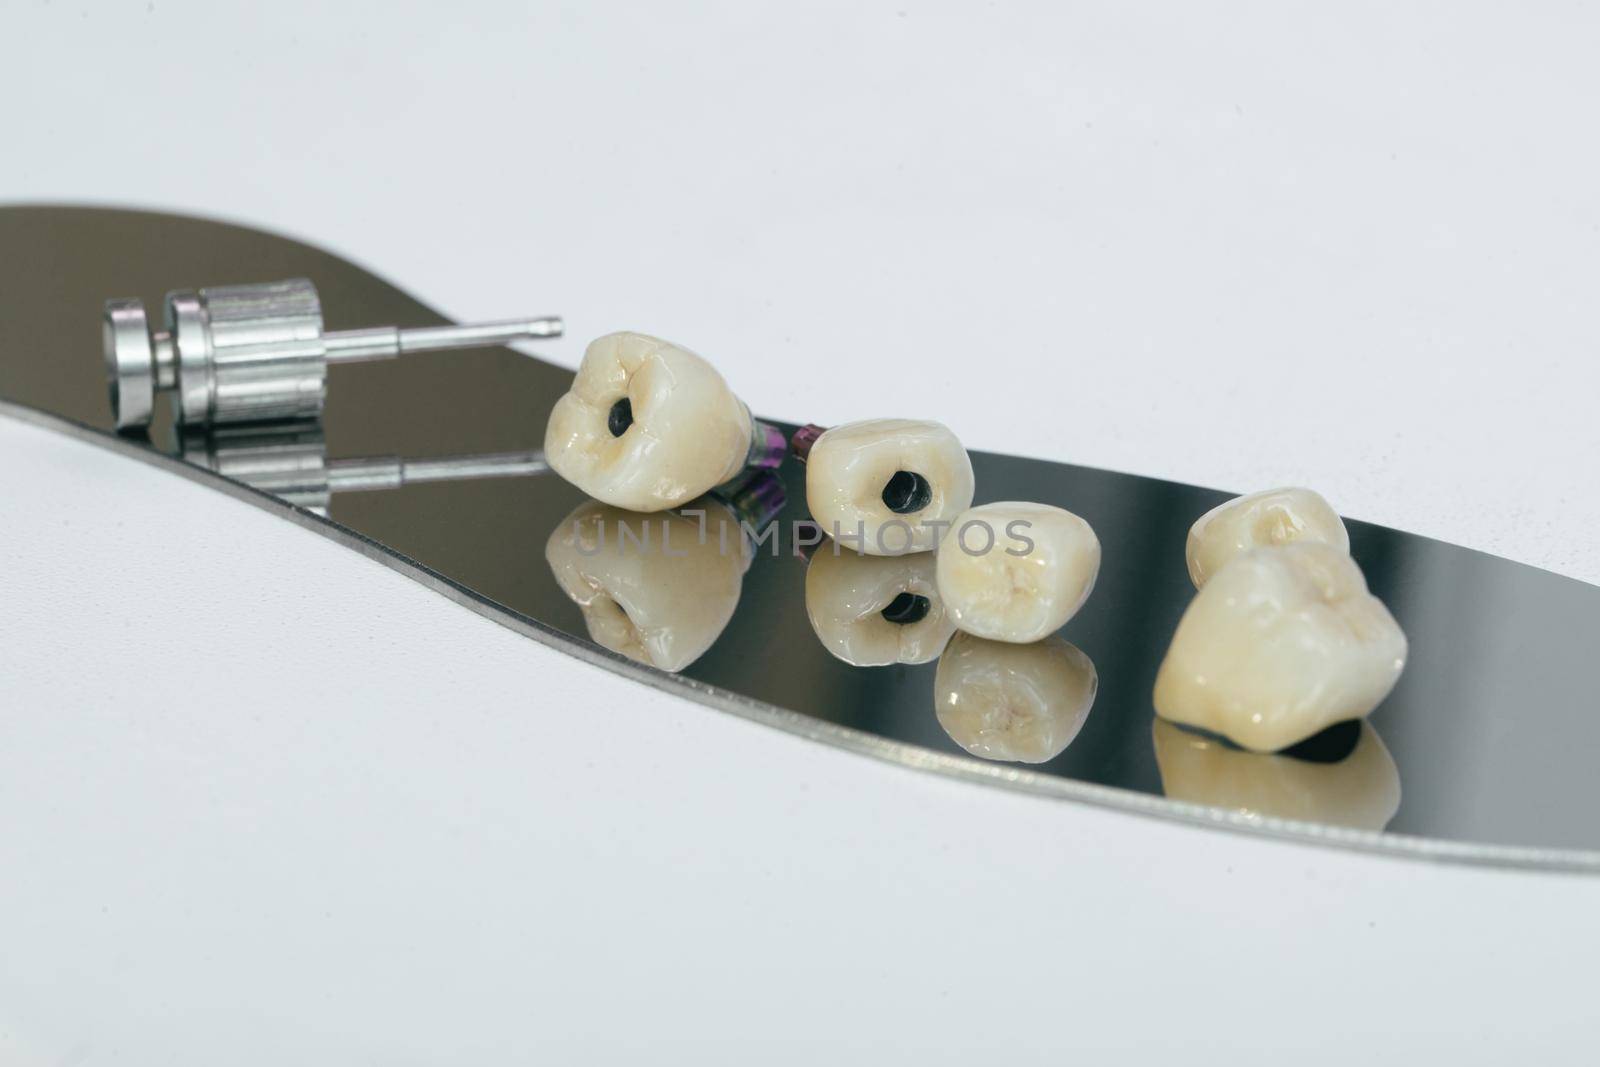 Monolithic screw retained zirconium crown on the implant, a screw and a manual key for screwing the crown. Zirconium crown and zirconium hybrid abutment by uflypro